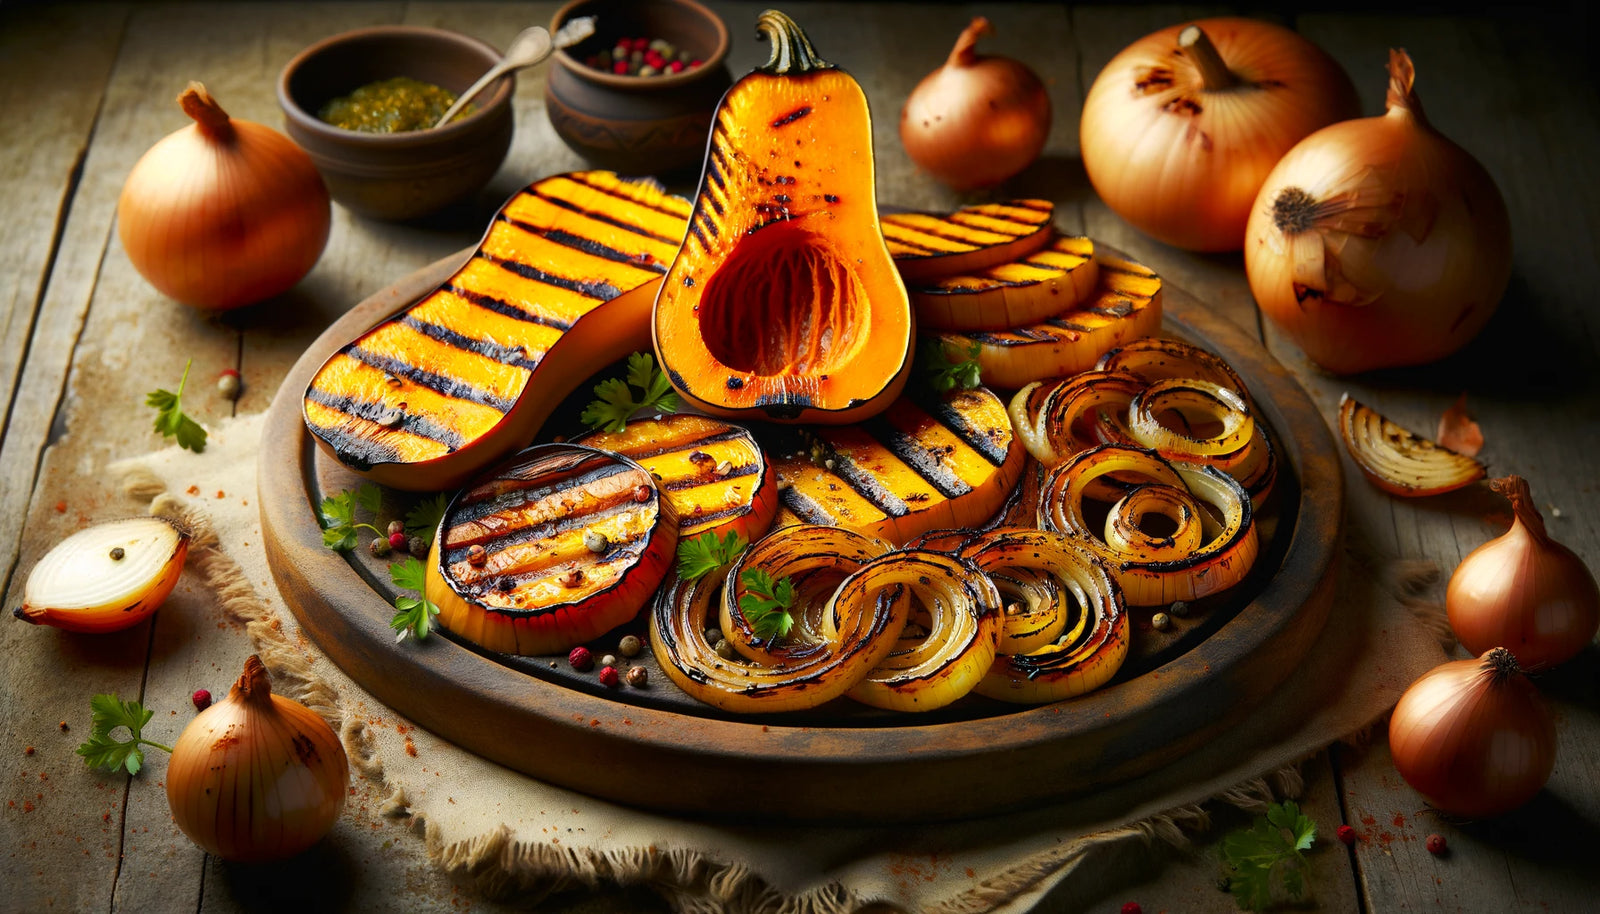 Grilled Butternut Squash Steaks, beautifully charred